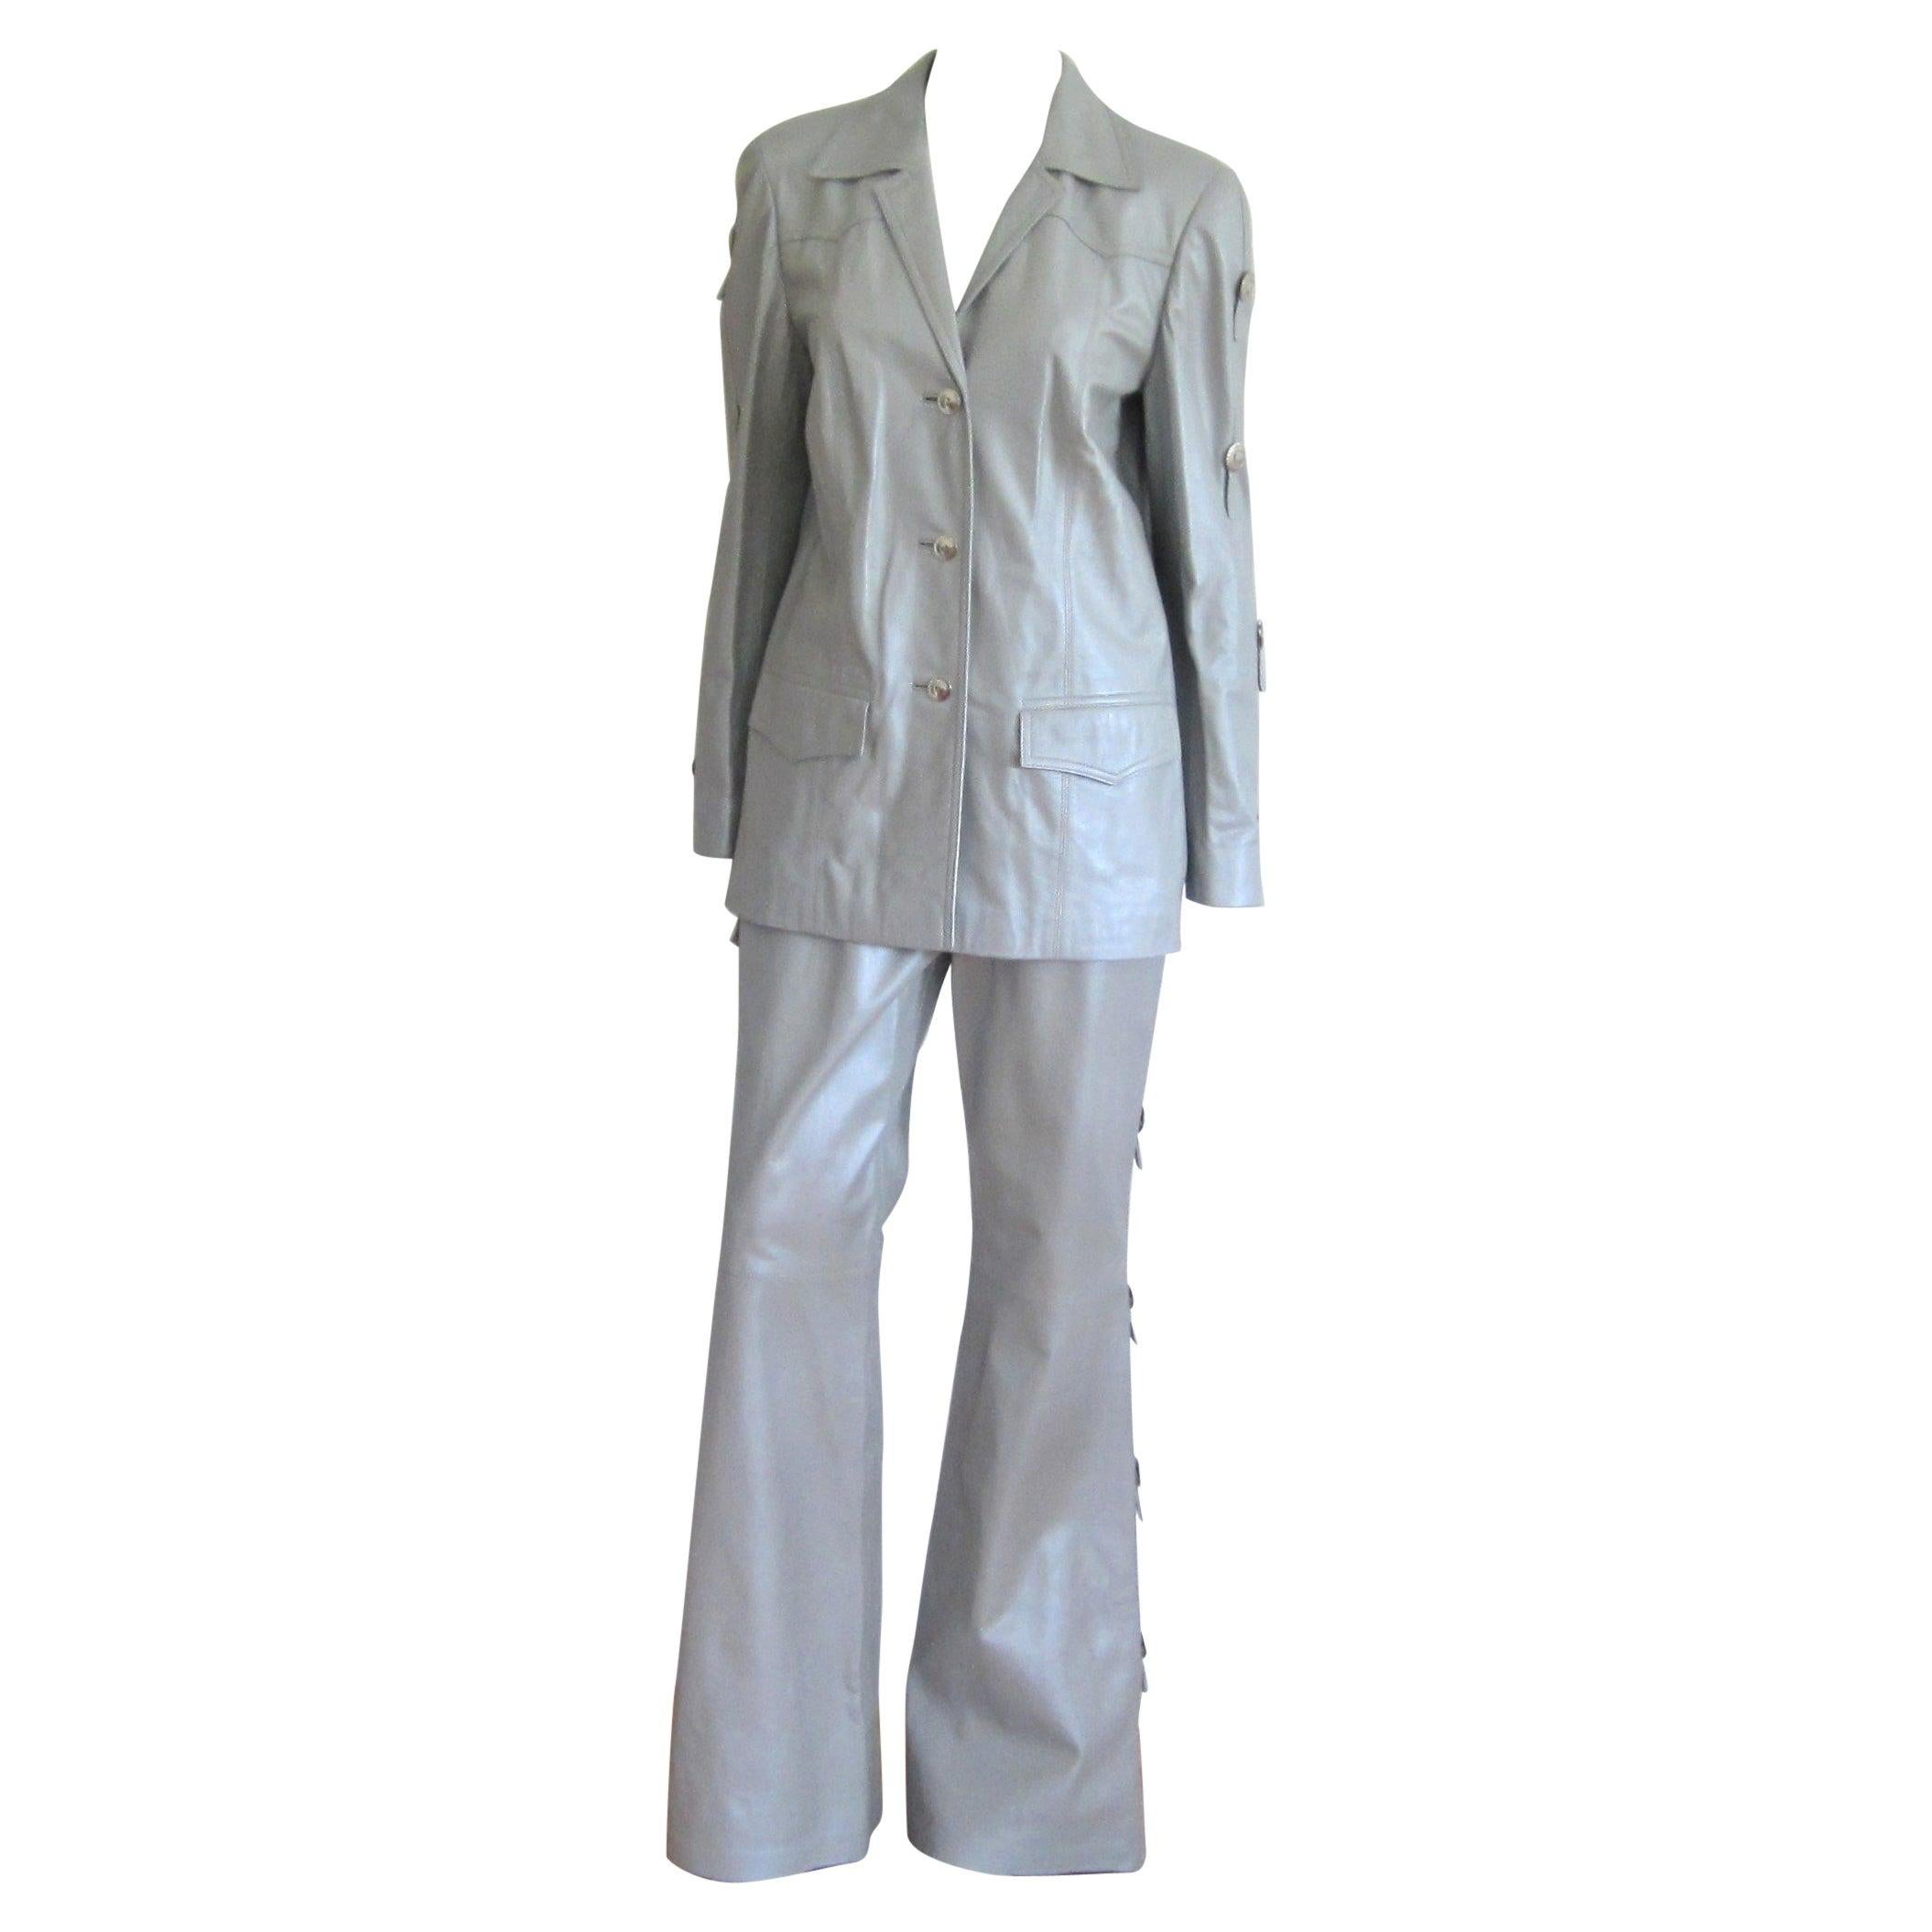  Escada Leather Jacket Pants - Western Motif Grey Suit New With Tags 1990s  For Sale